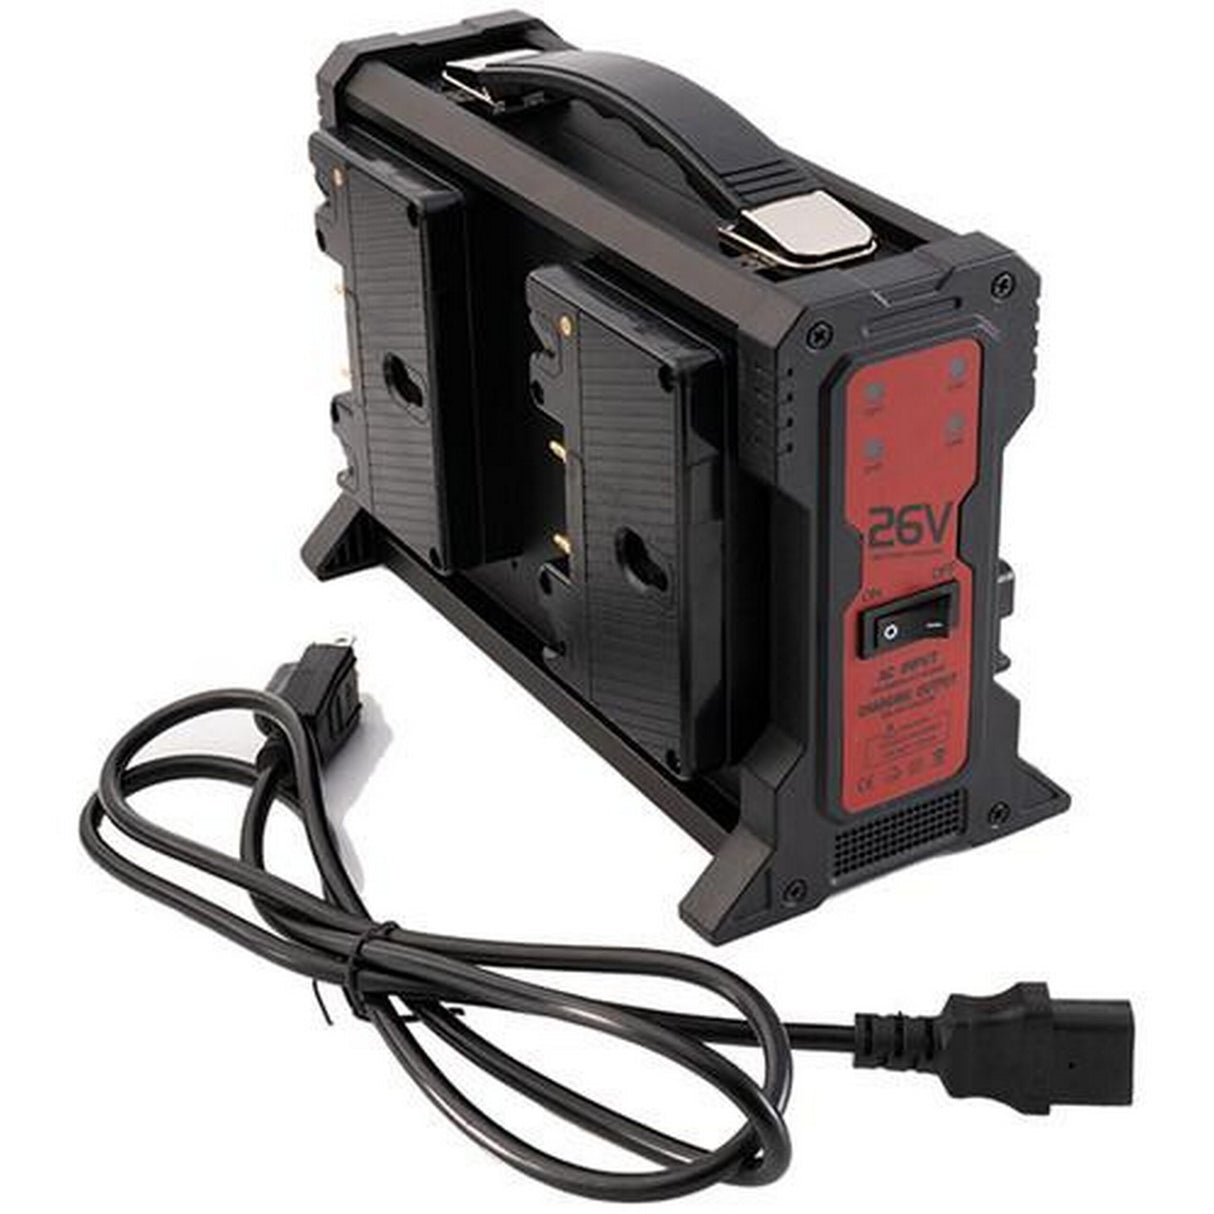 IndiPRO GM26VKT Micro-Series 26V 260Wh Lithium-Ion Battery and 26V Charger Kit, Gold Mount